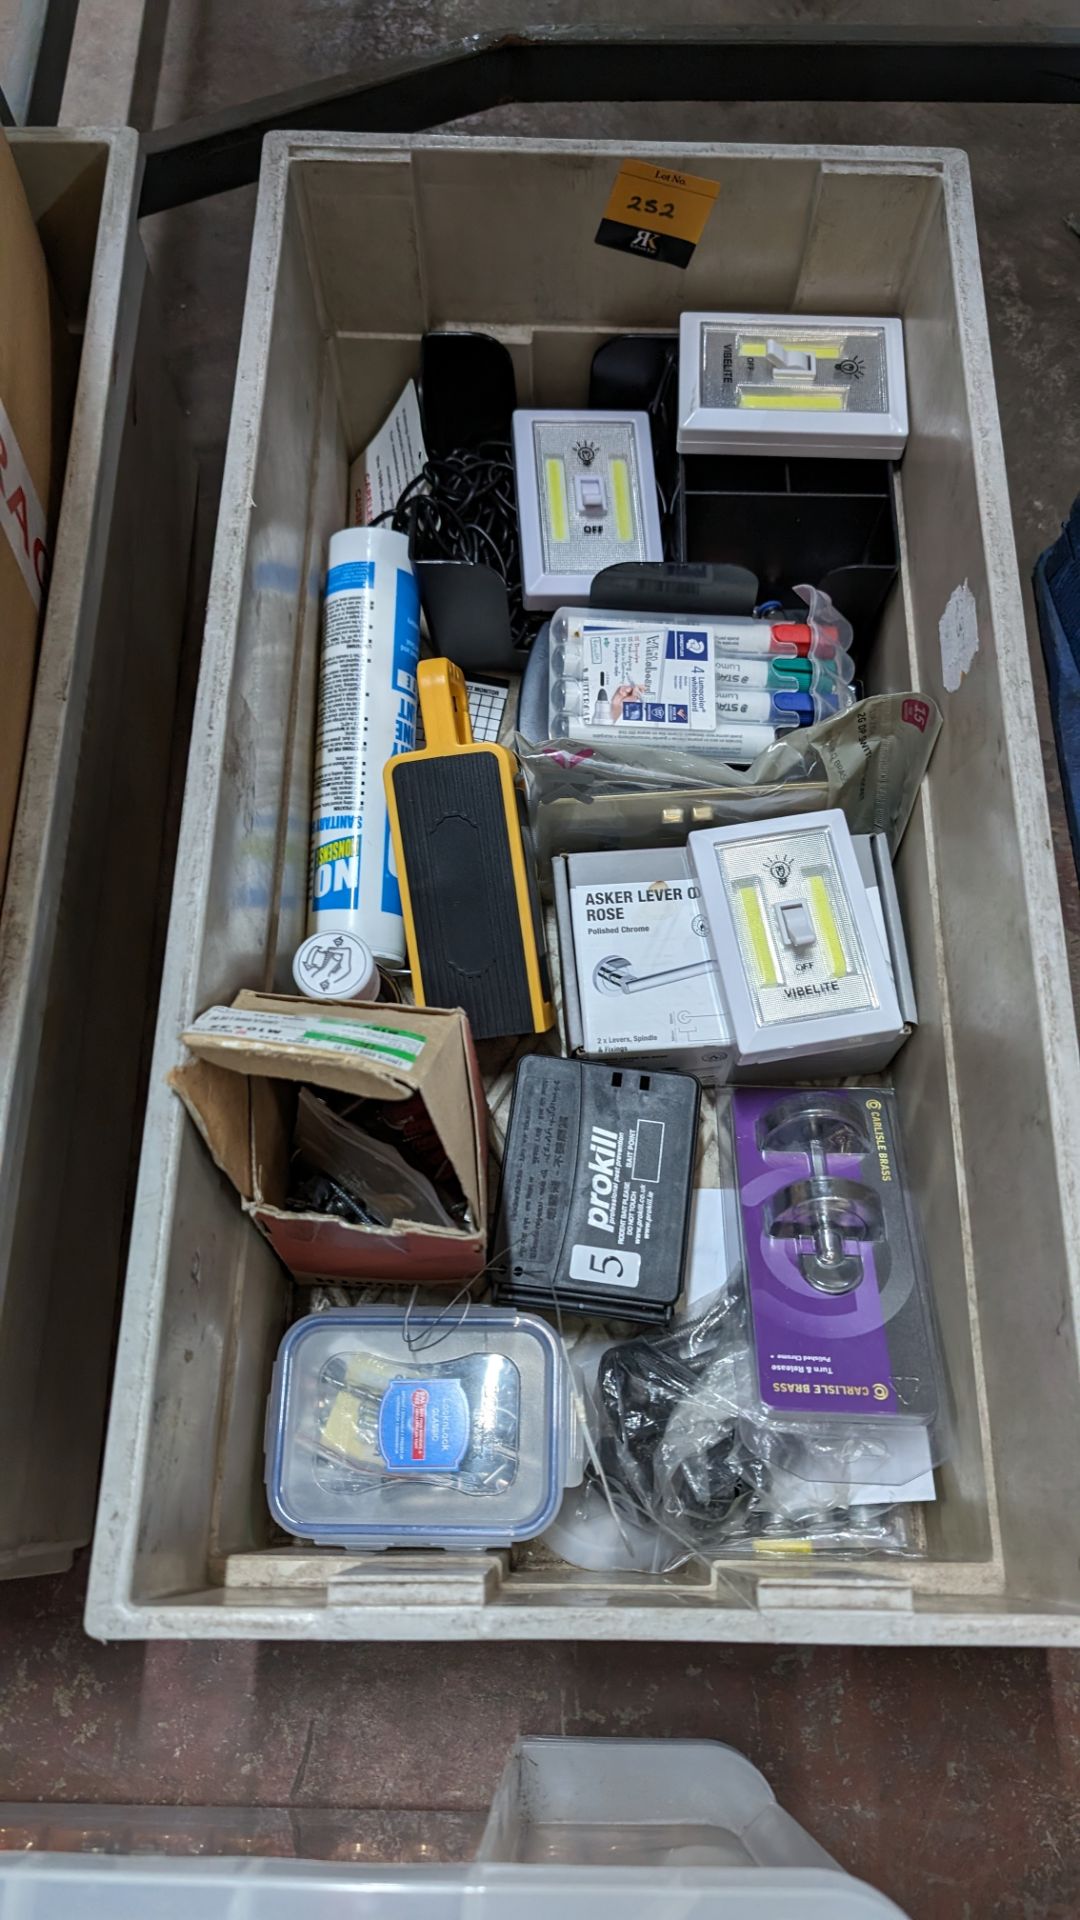 The contents of a crate of miscellaneous items